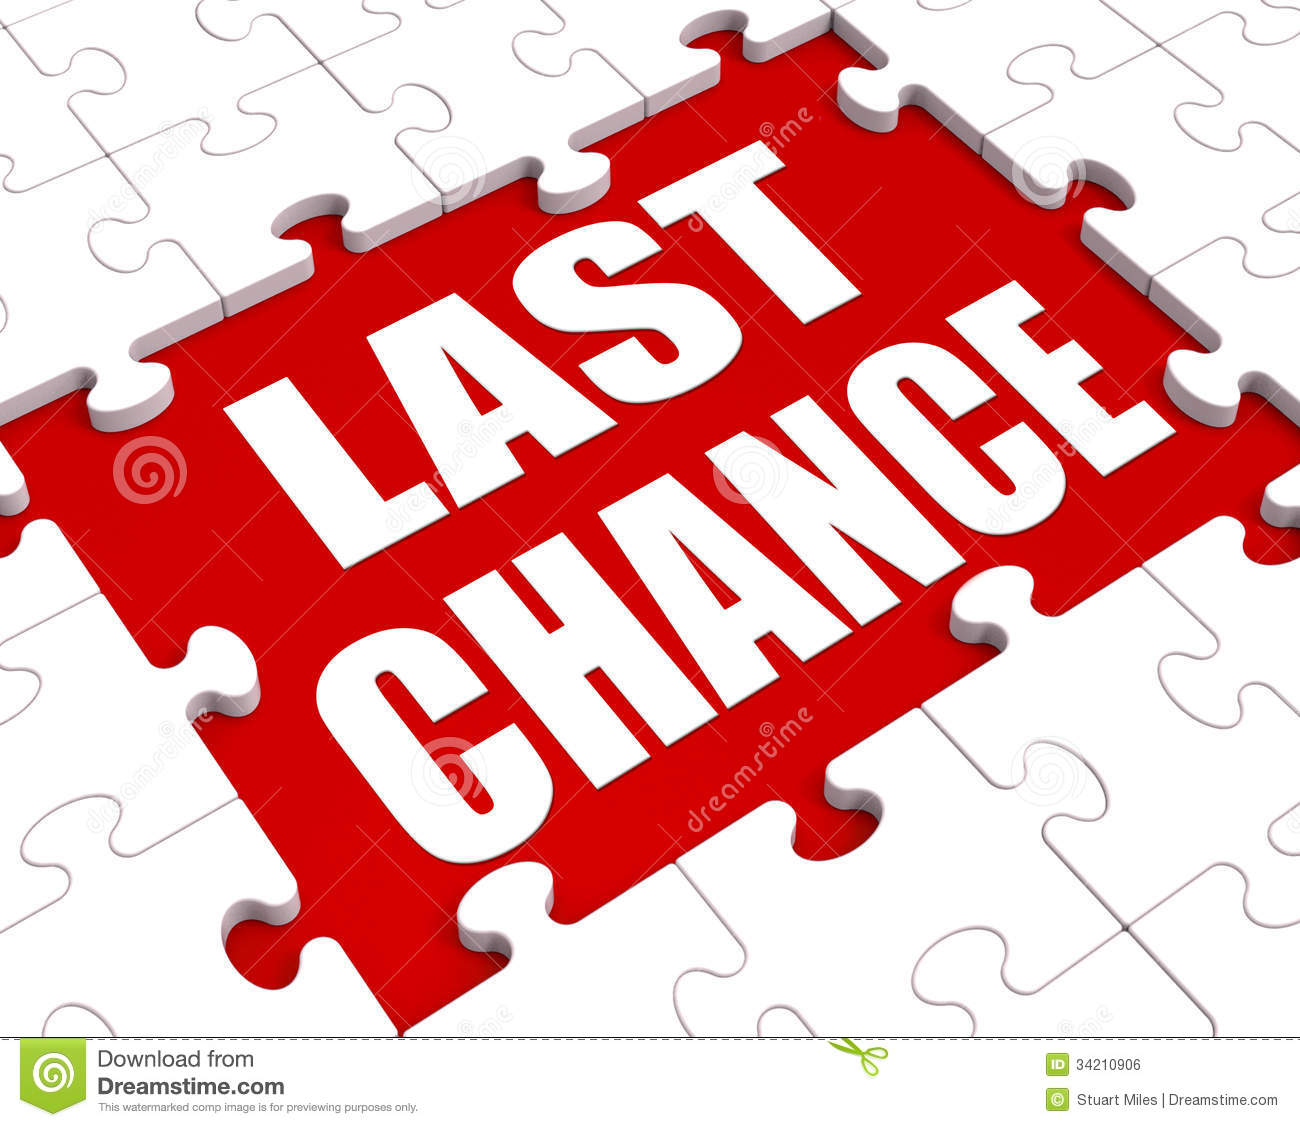 Last Chance Puzzle Shows Final Opportunity Or Act Now Royalty Free